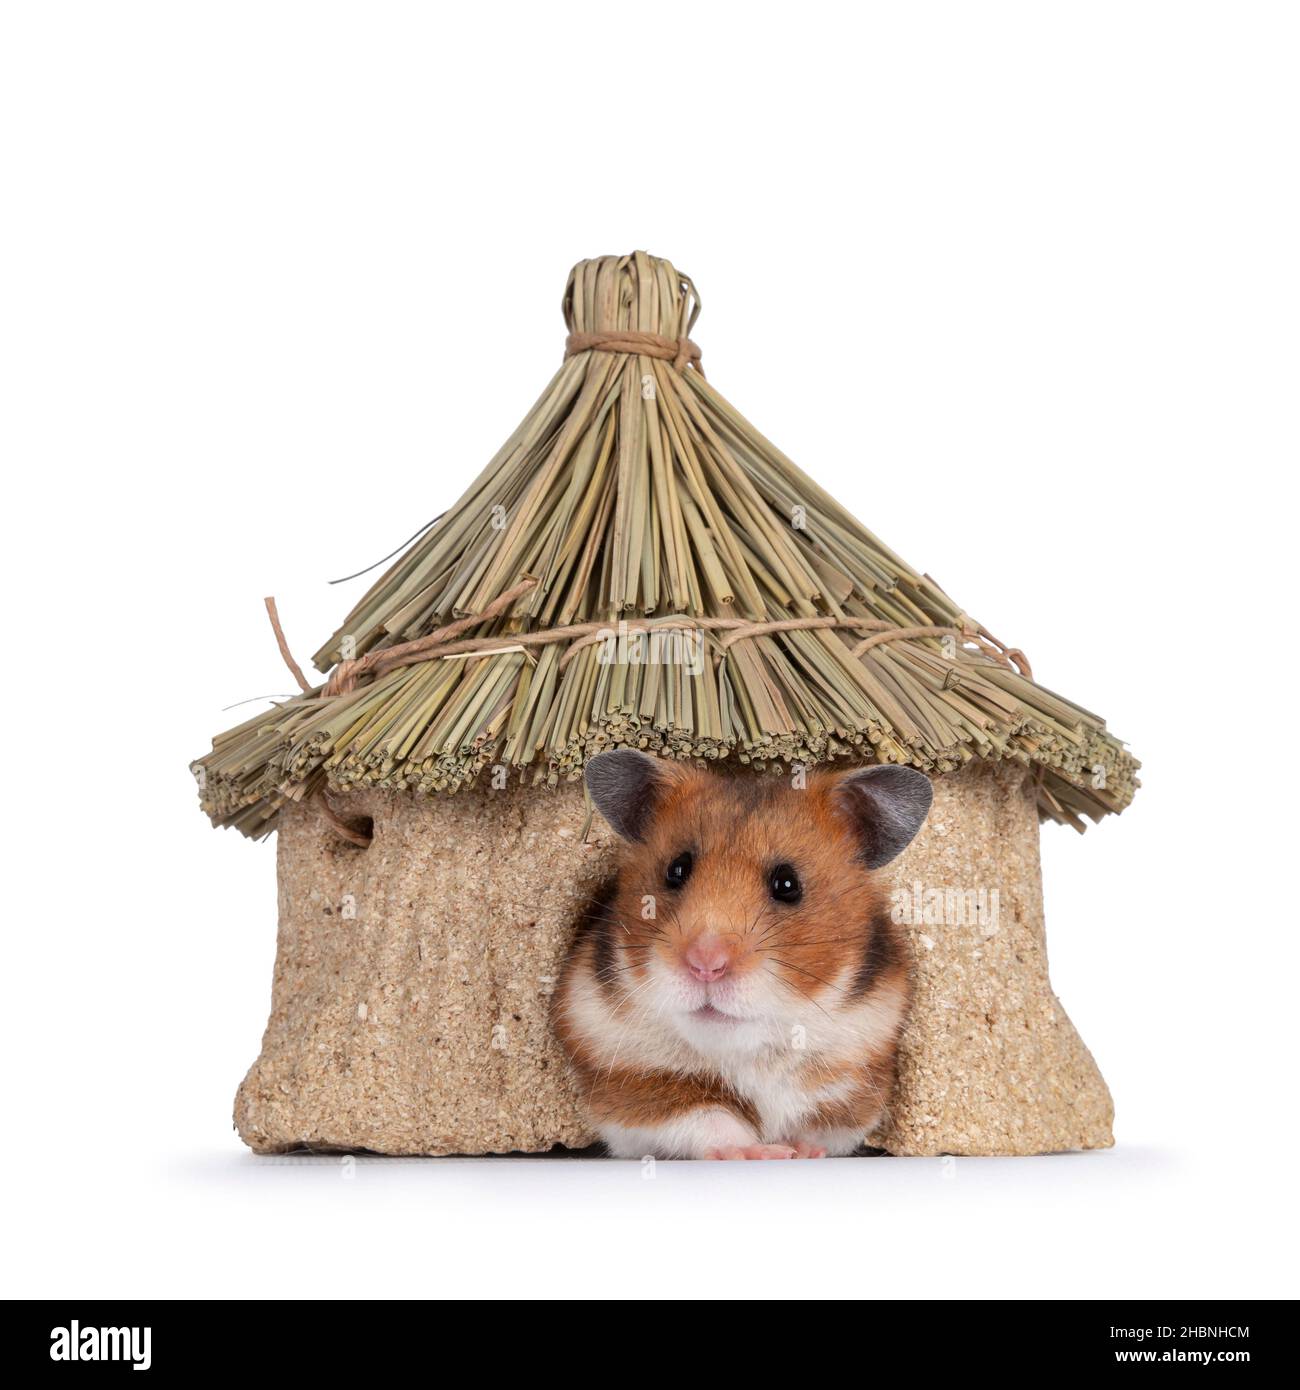 Cute Syrian or golden hamster, coming out of edible decoration house. Looking  curious to camera. Isolated on a white background. Stock Photo